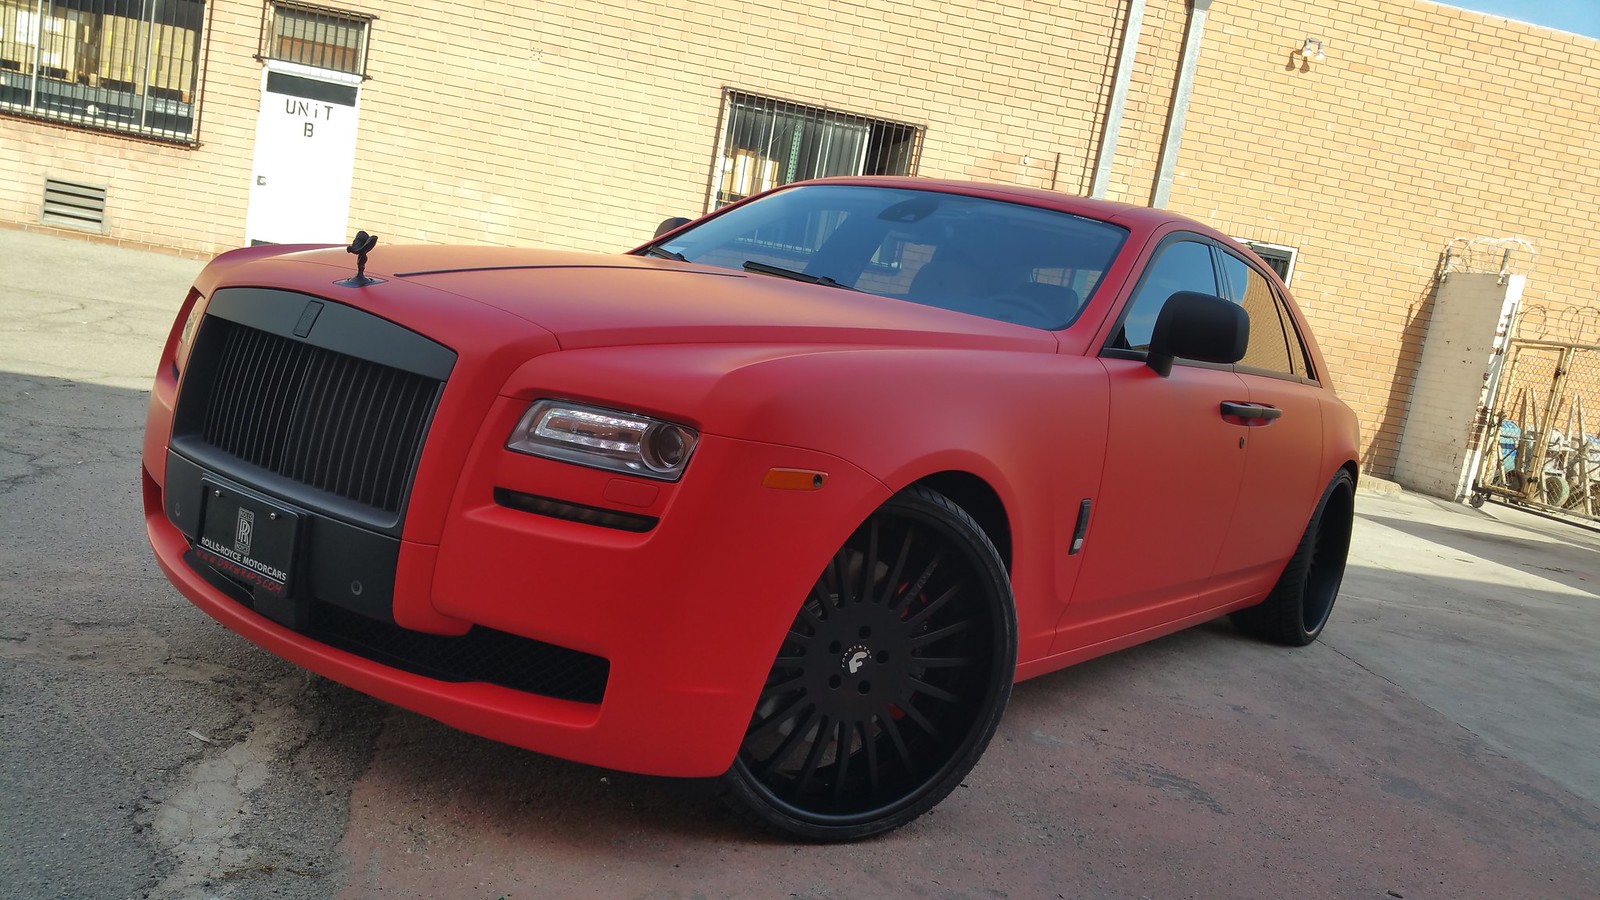 RollsRoyce Ghost Extended Wheelbase 2012  pictures information  specs